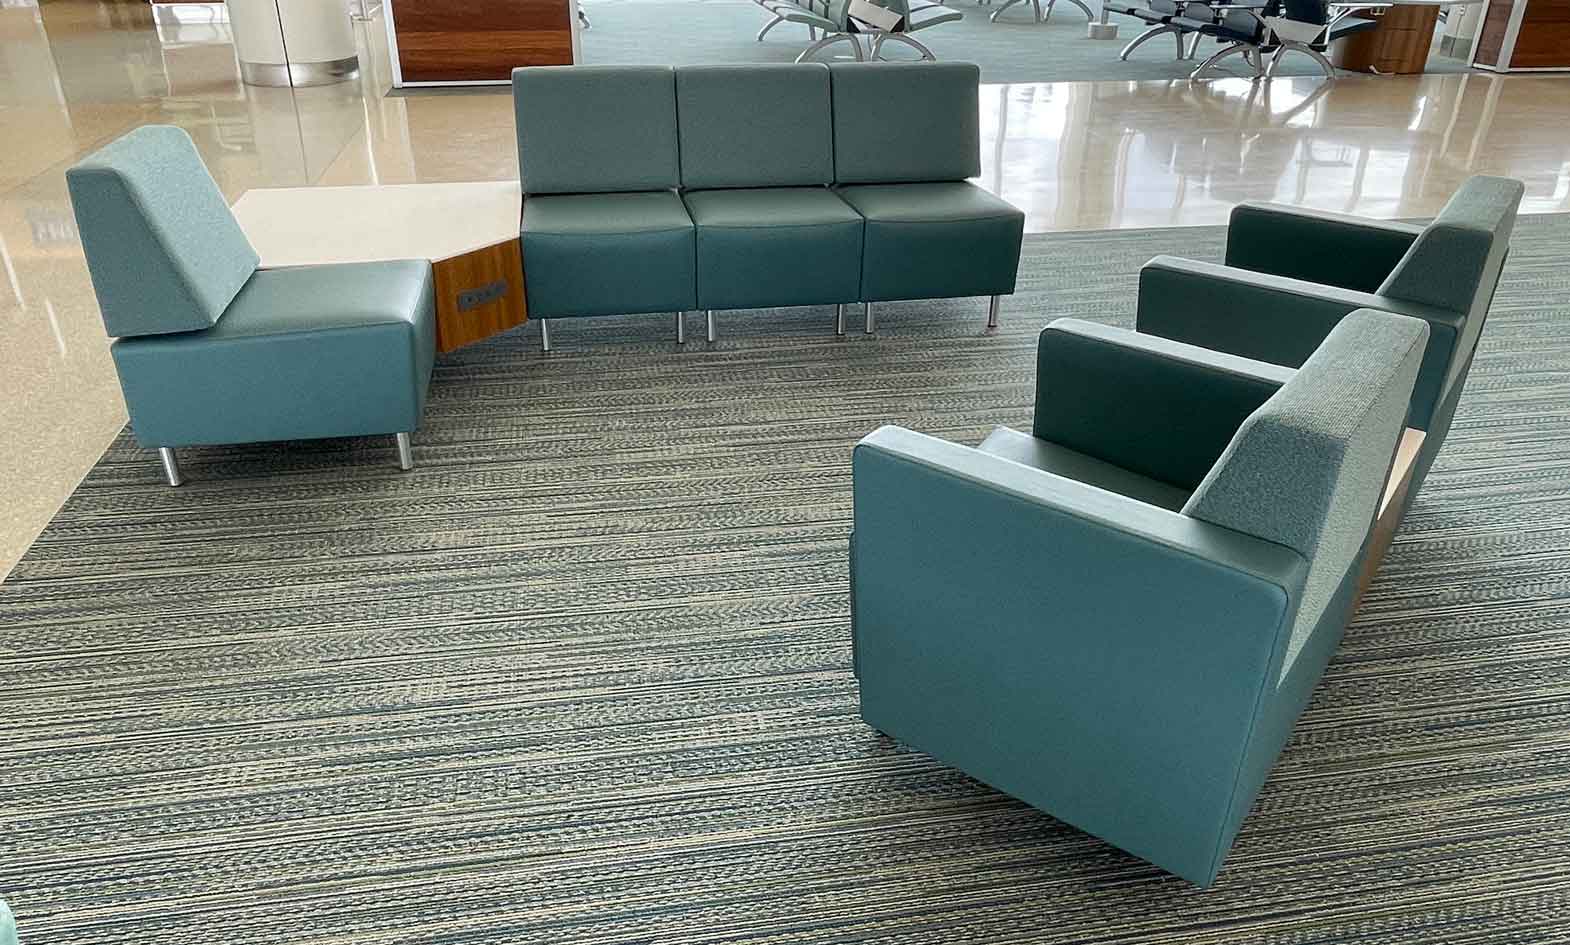 Airport seating, modular lounge with powered occasional tables